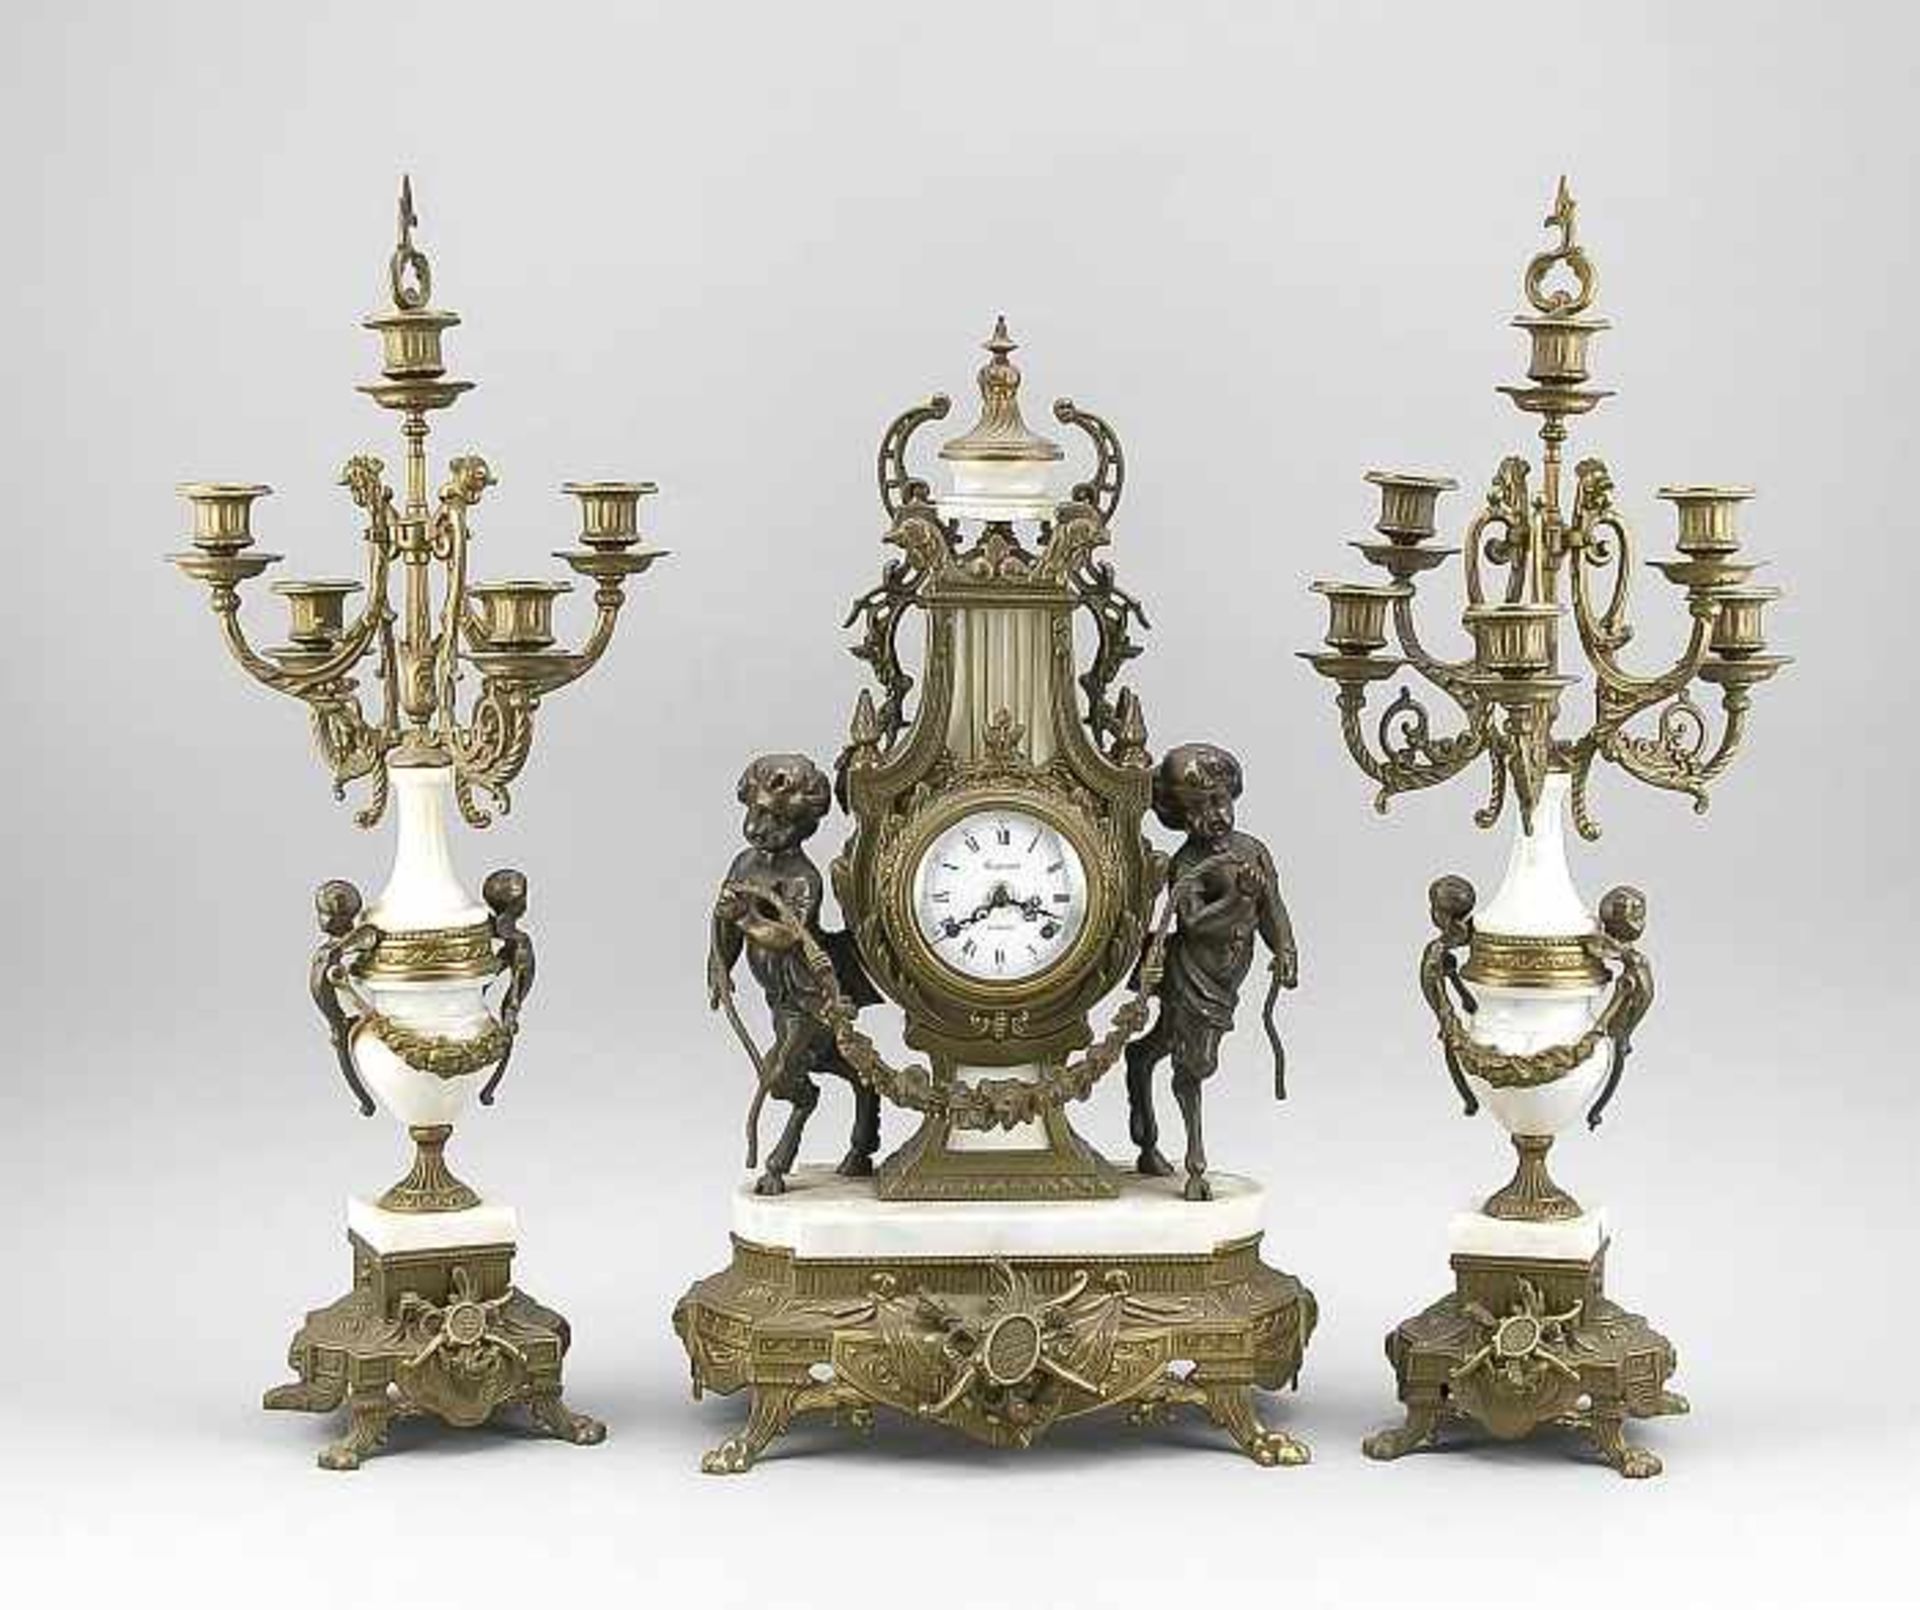 Three-piece set of pendulum. Marble and putti. 20th century. Movement in lyre form. Regnant a.